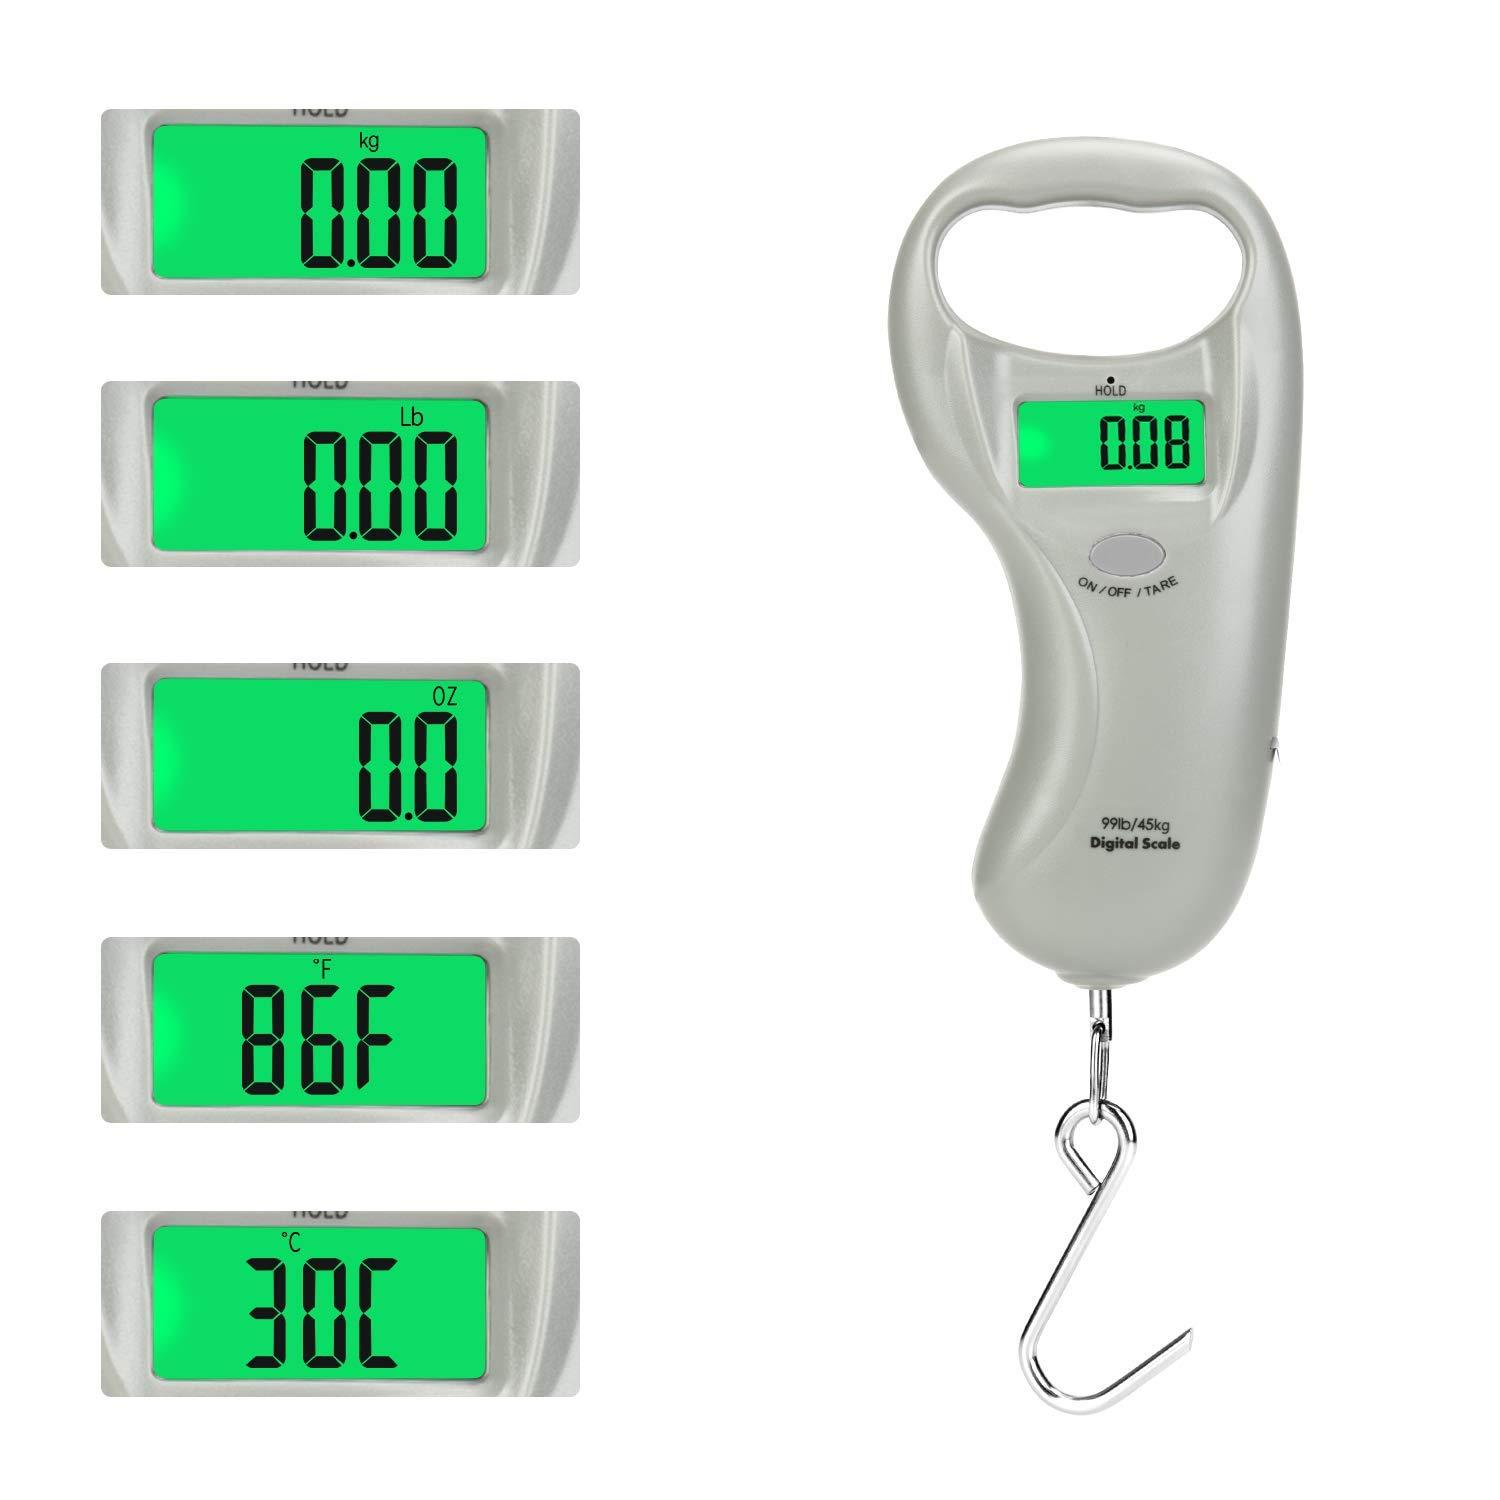 Portable Electronic Hook Scale Digital Hanging Bag Luggage Weight Scale  Fishing Scale with Meas - Measuring Tools & Sensors, Facebook Marketplace